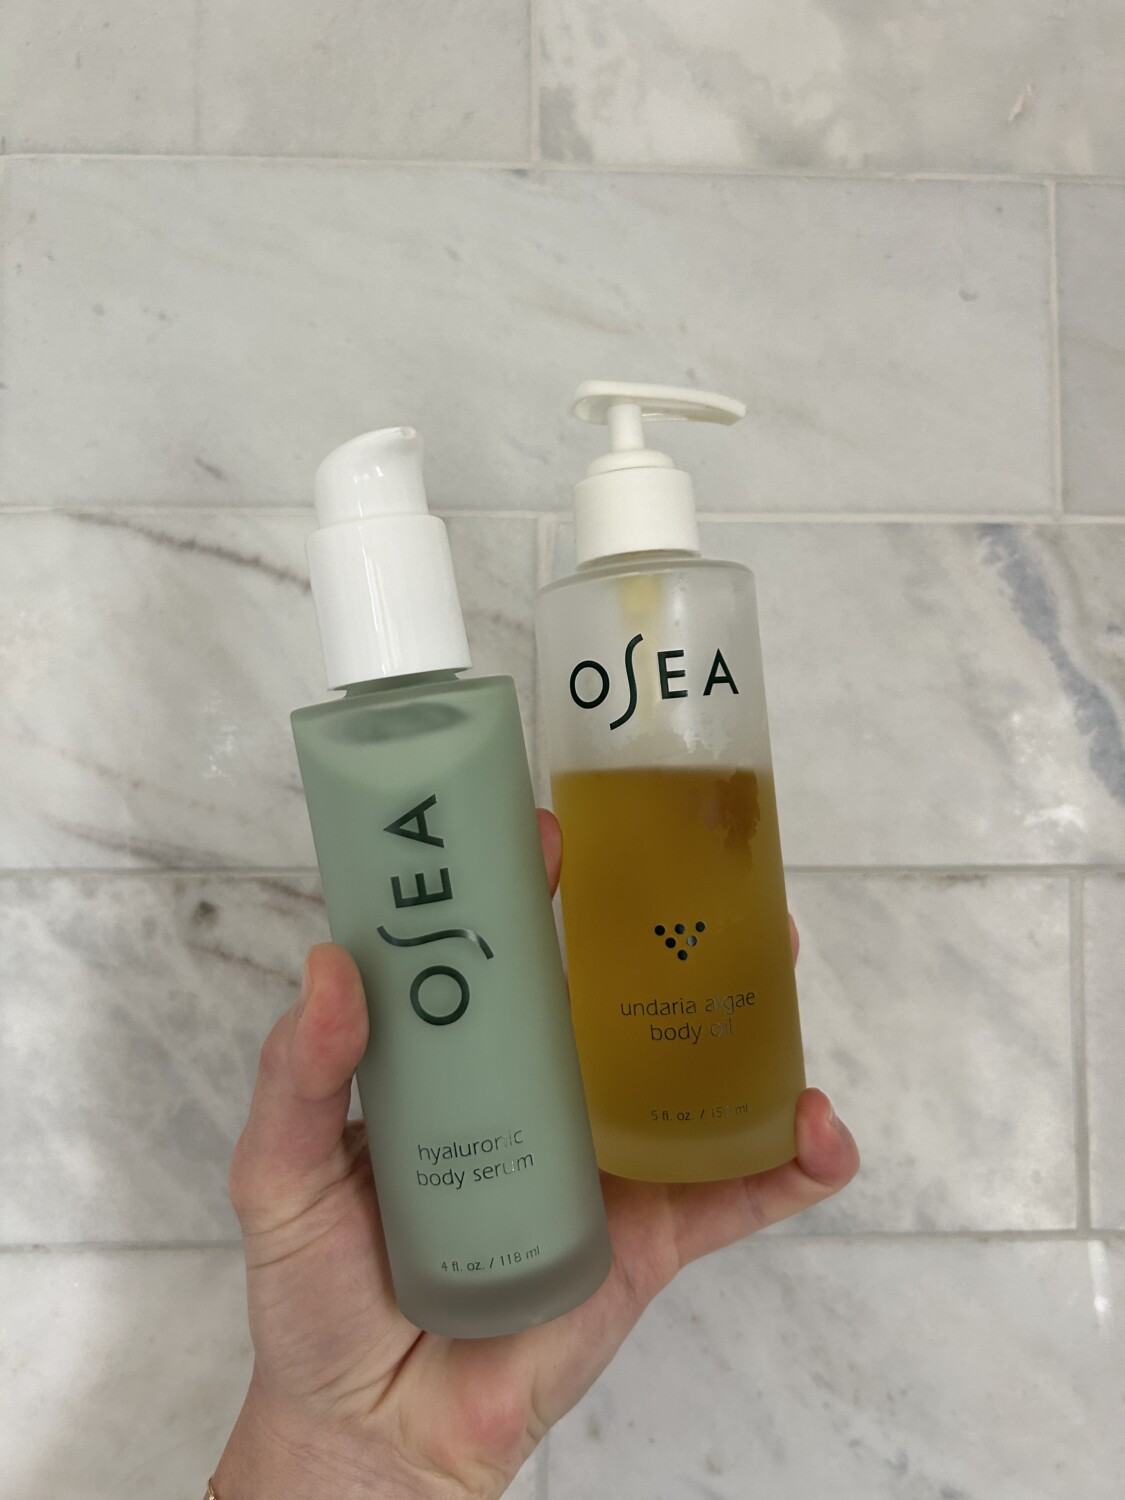 Osea body oil and body serum in front of a marble shower wall